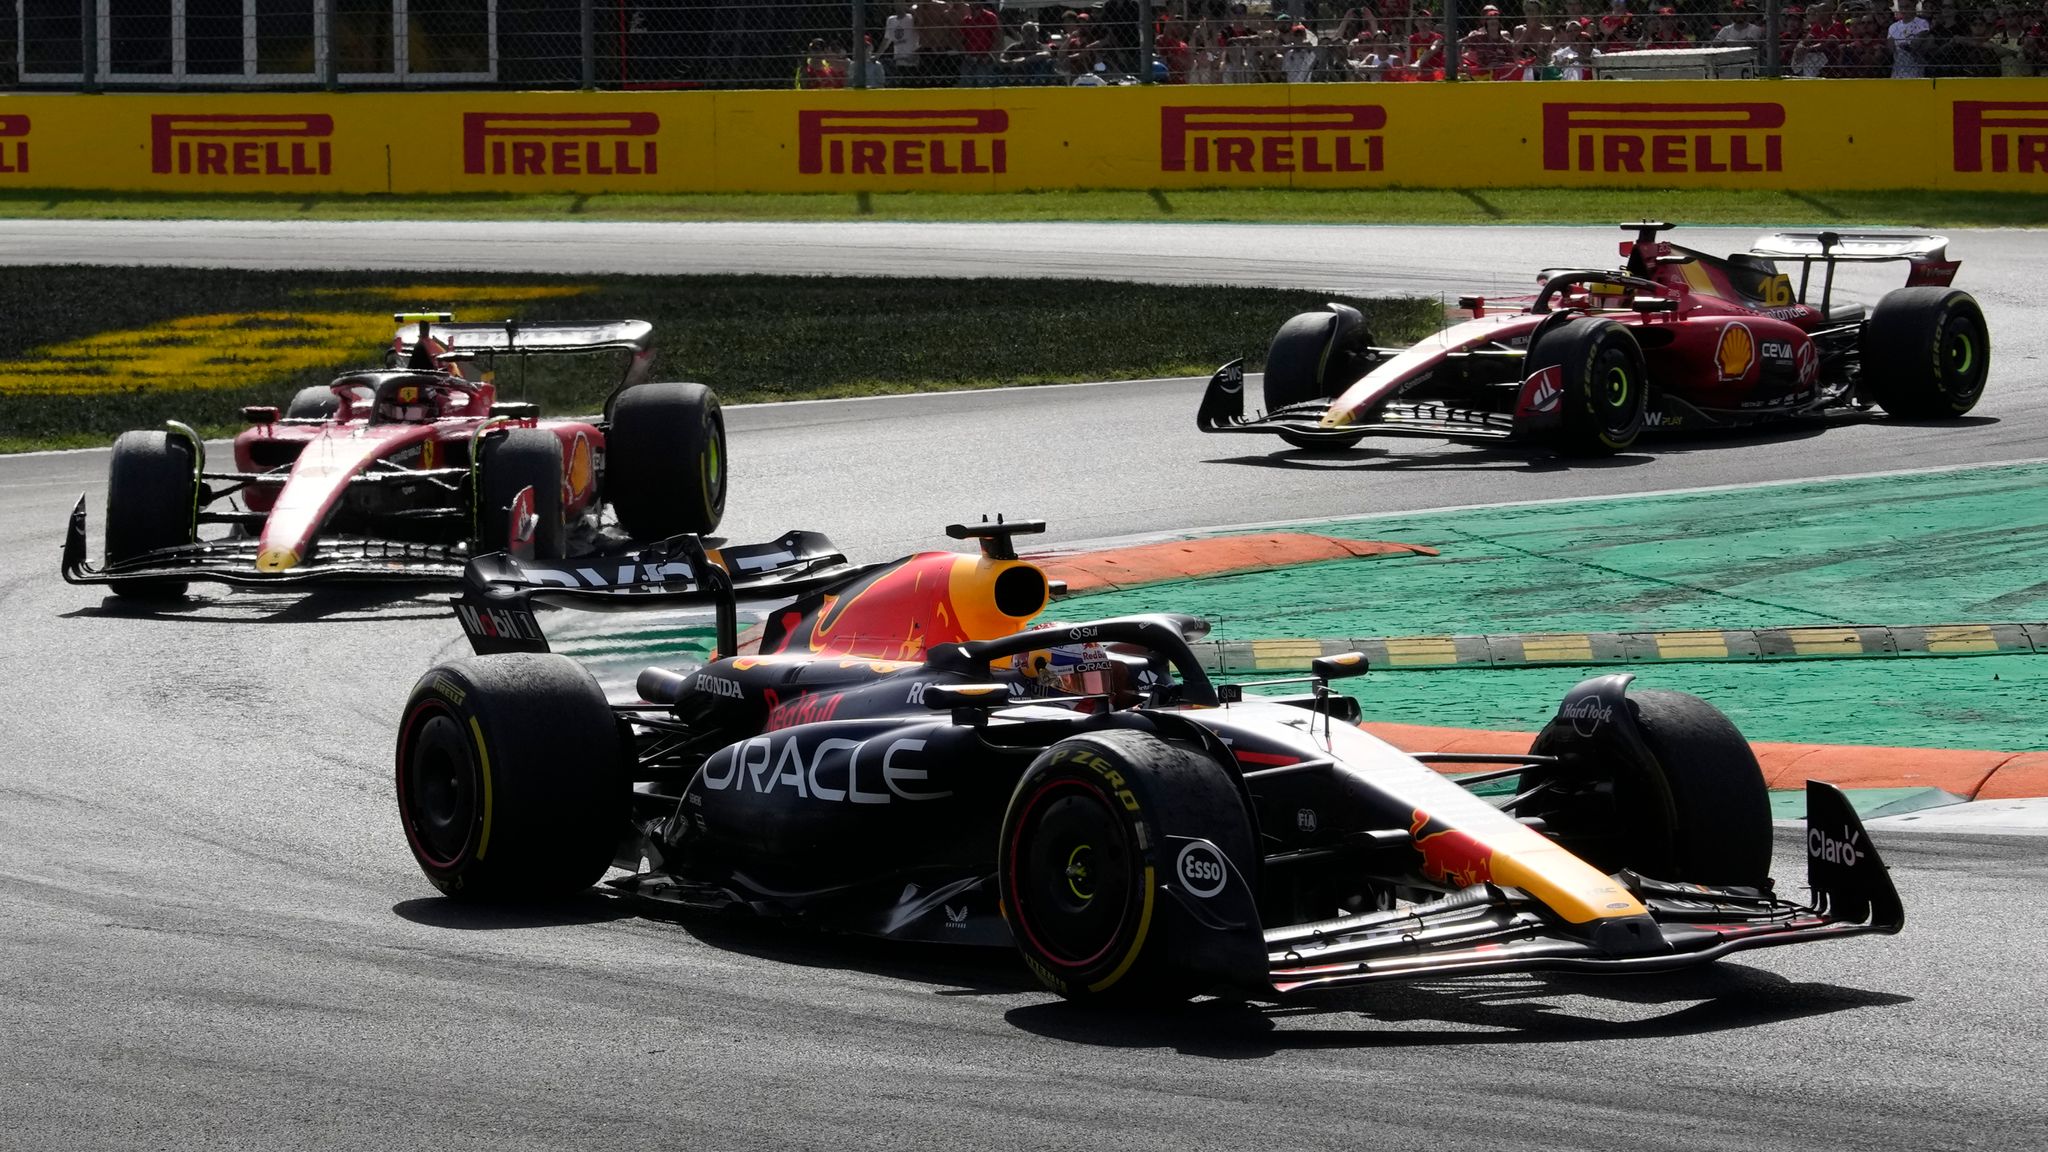 Martin Brundle on the Italian GP 10 for Max Verstappen, Lewis Hamilton disappoints and Carlos Sainz stars F1 News